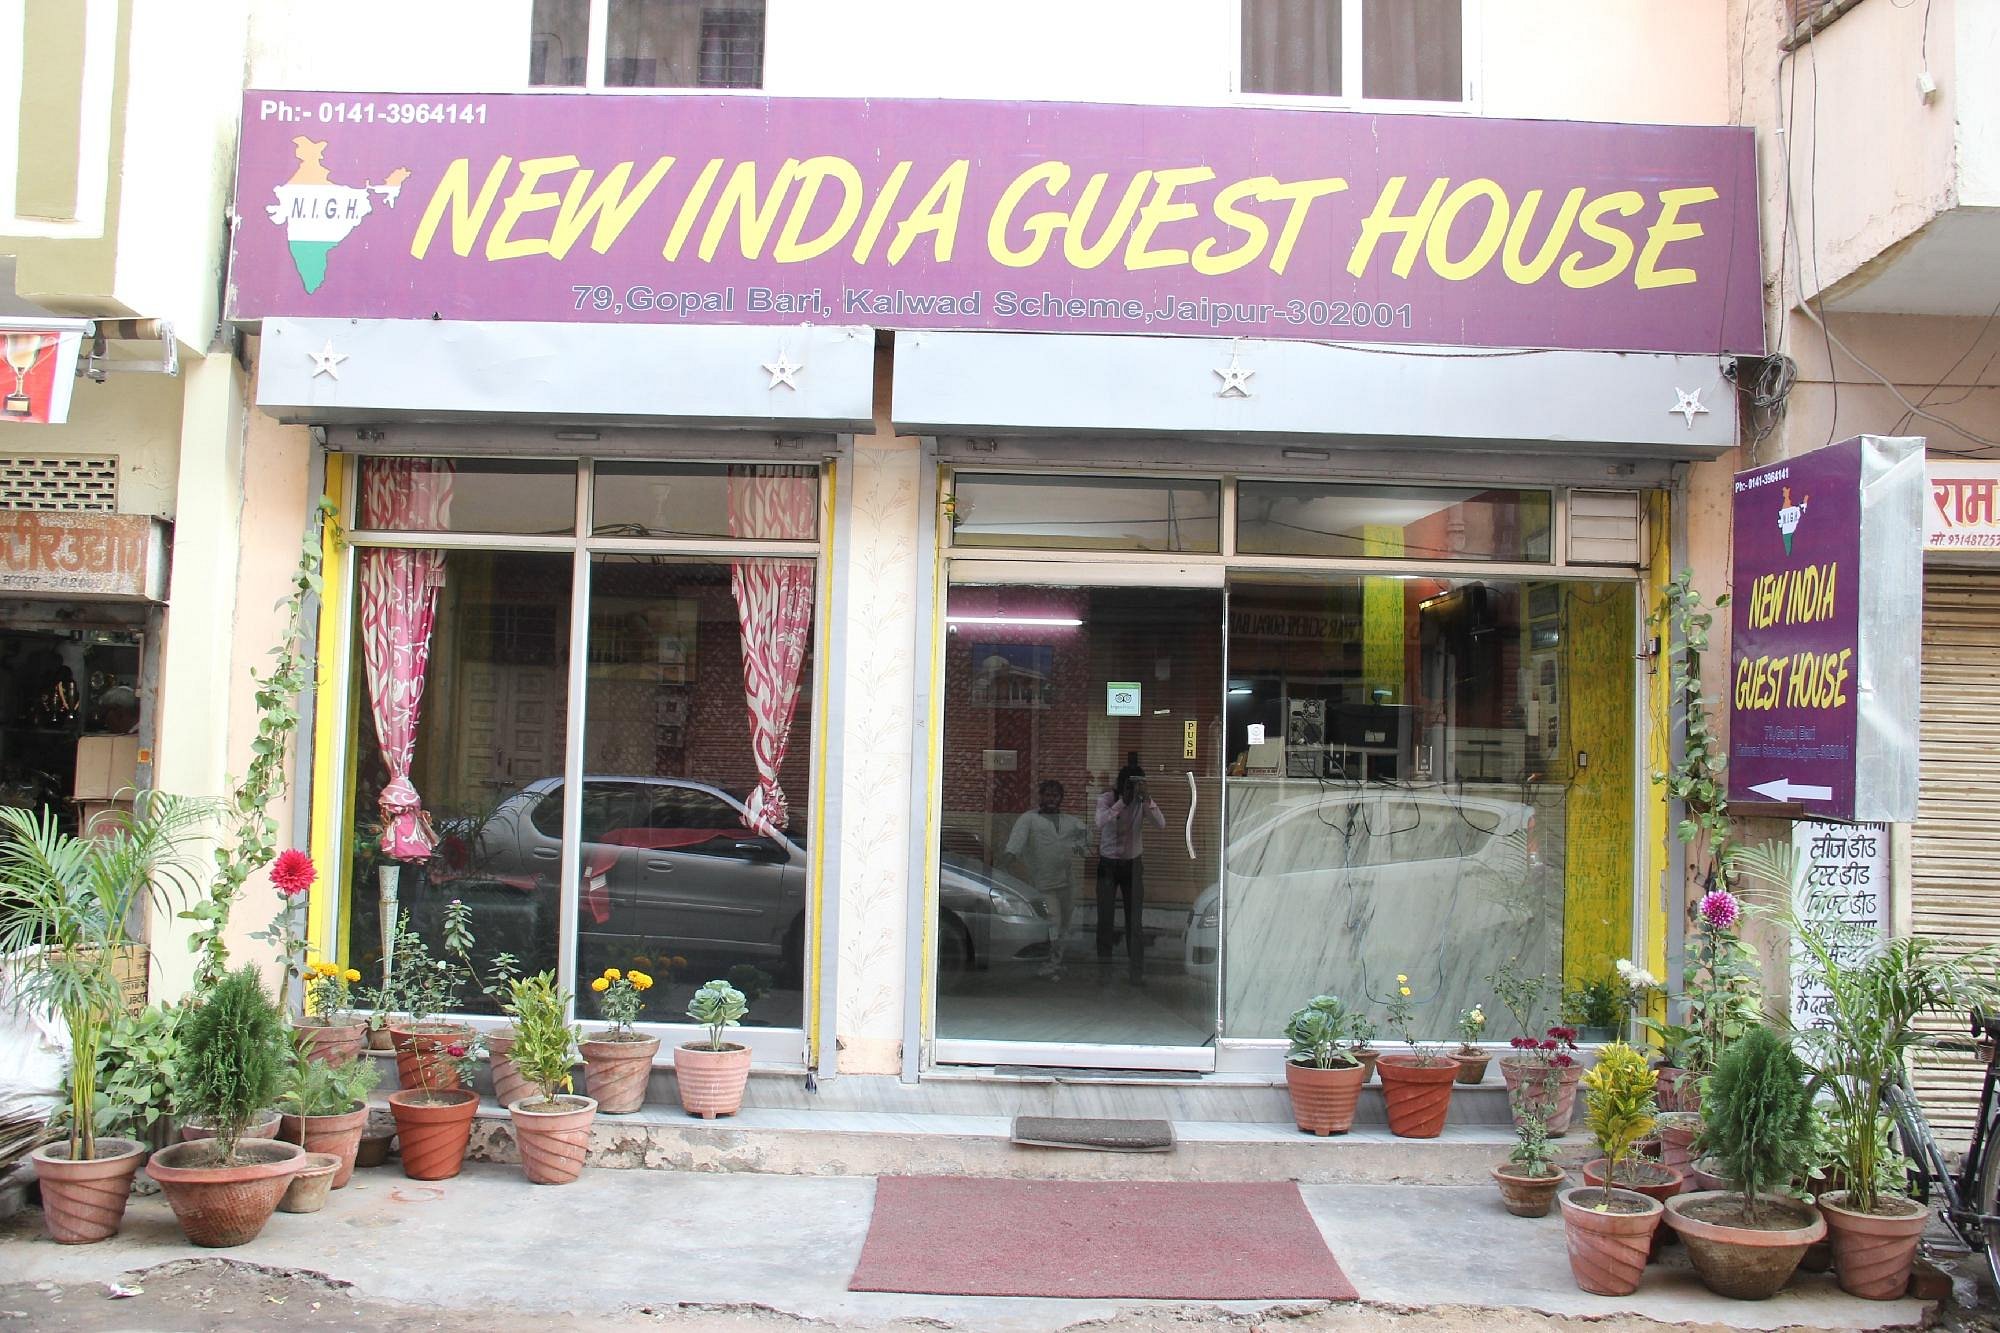 New India Guest House image